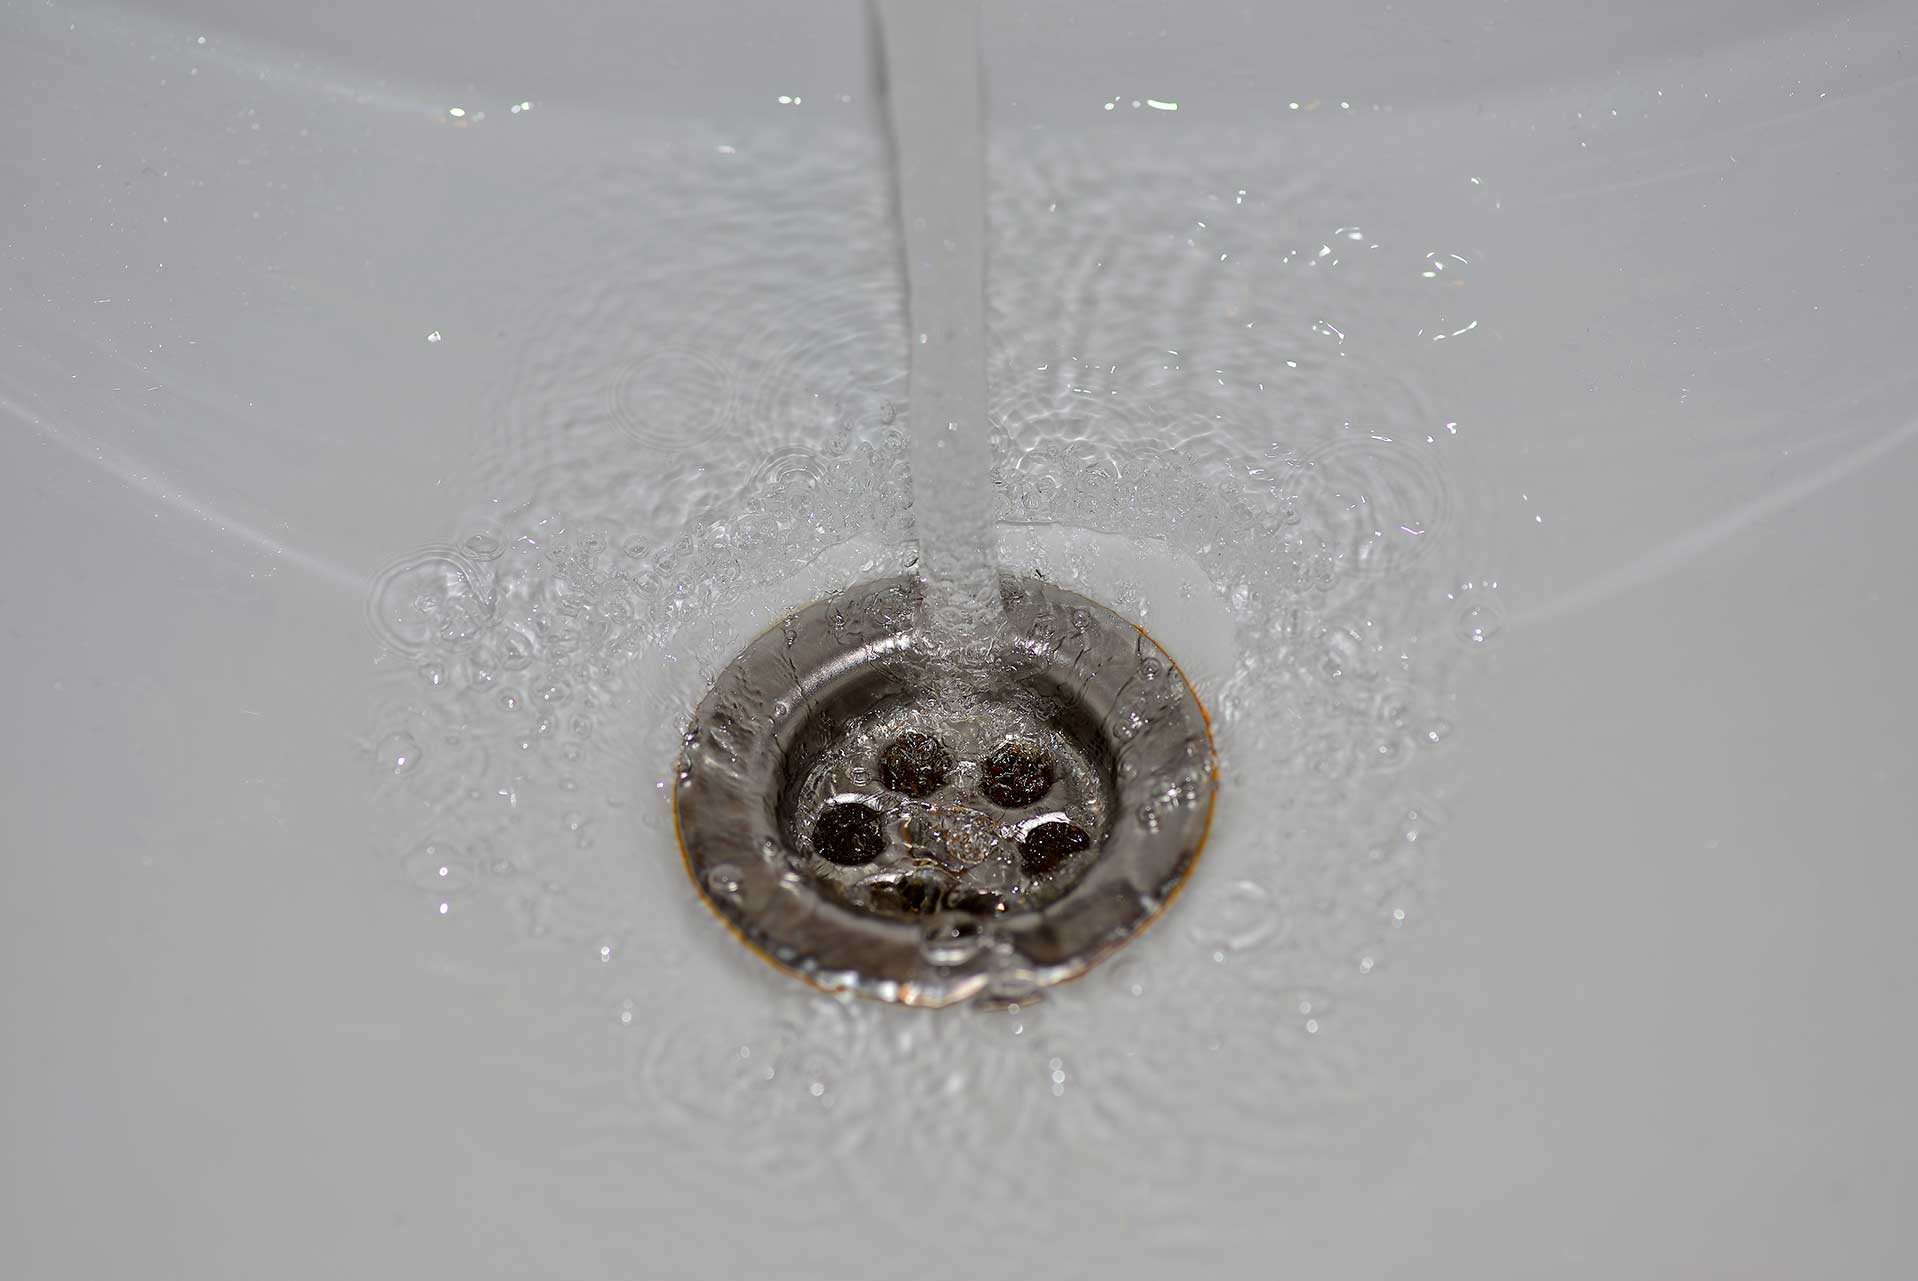 A2B Drains provides services to unblock blocked sinks and drains for properties in Edgbaston.